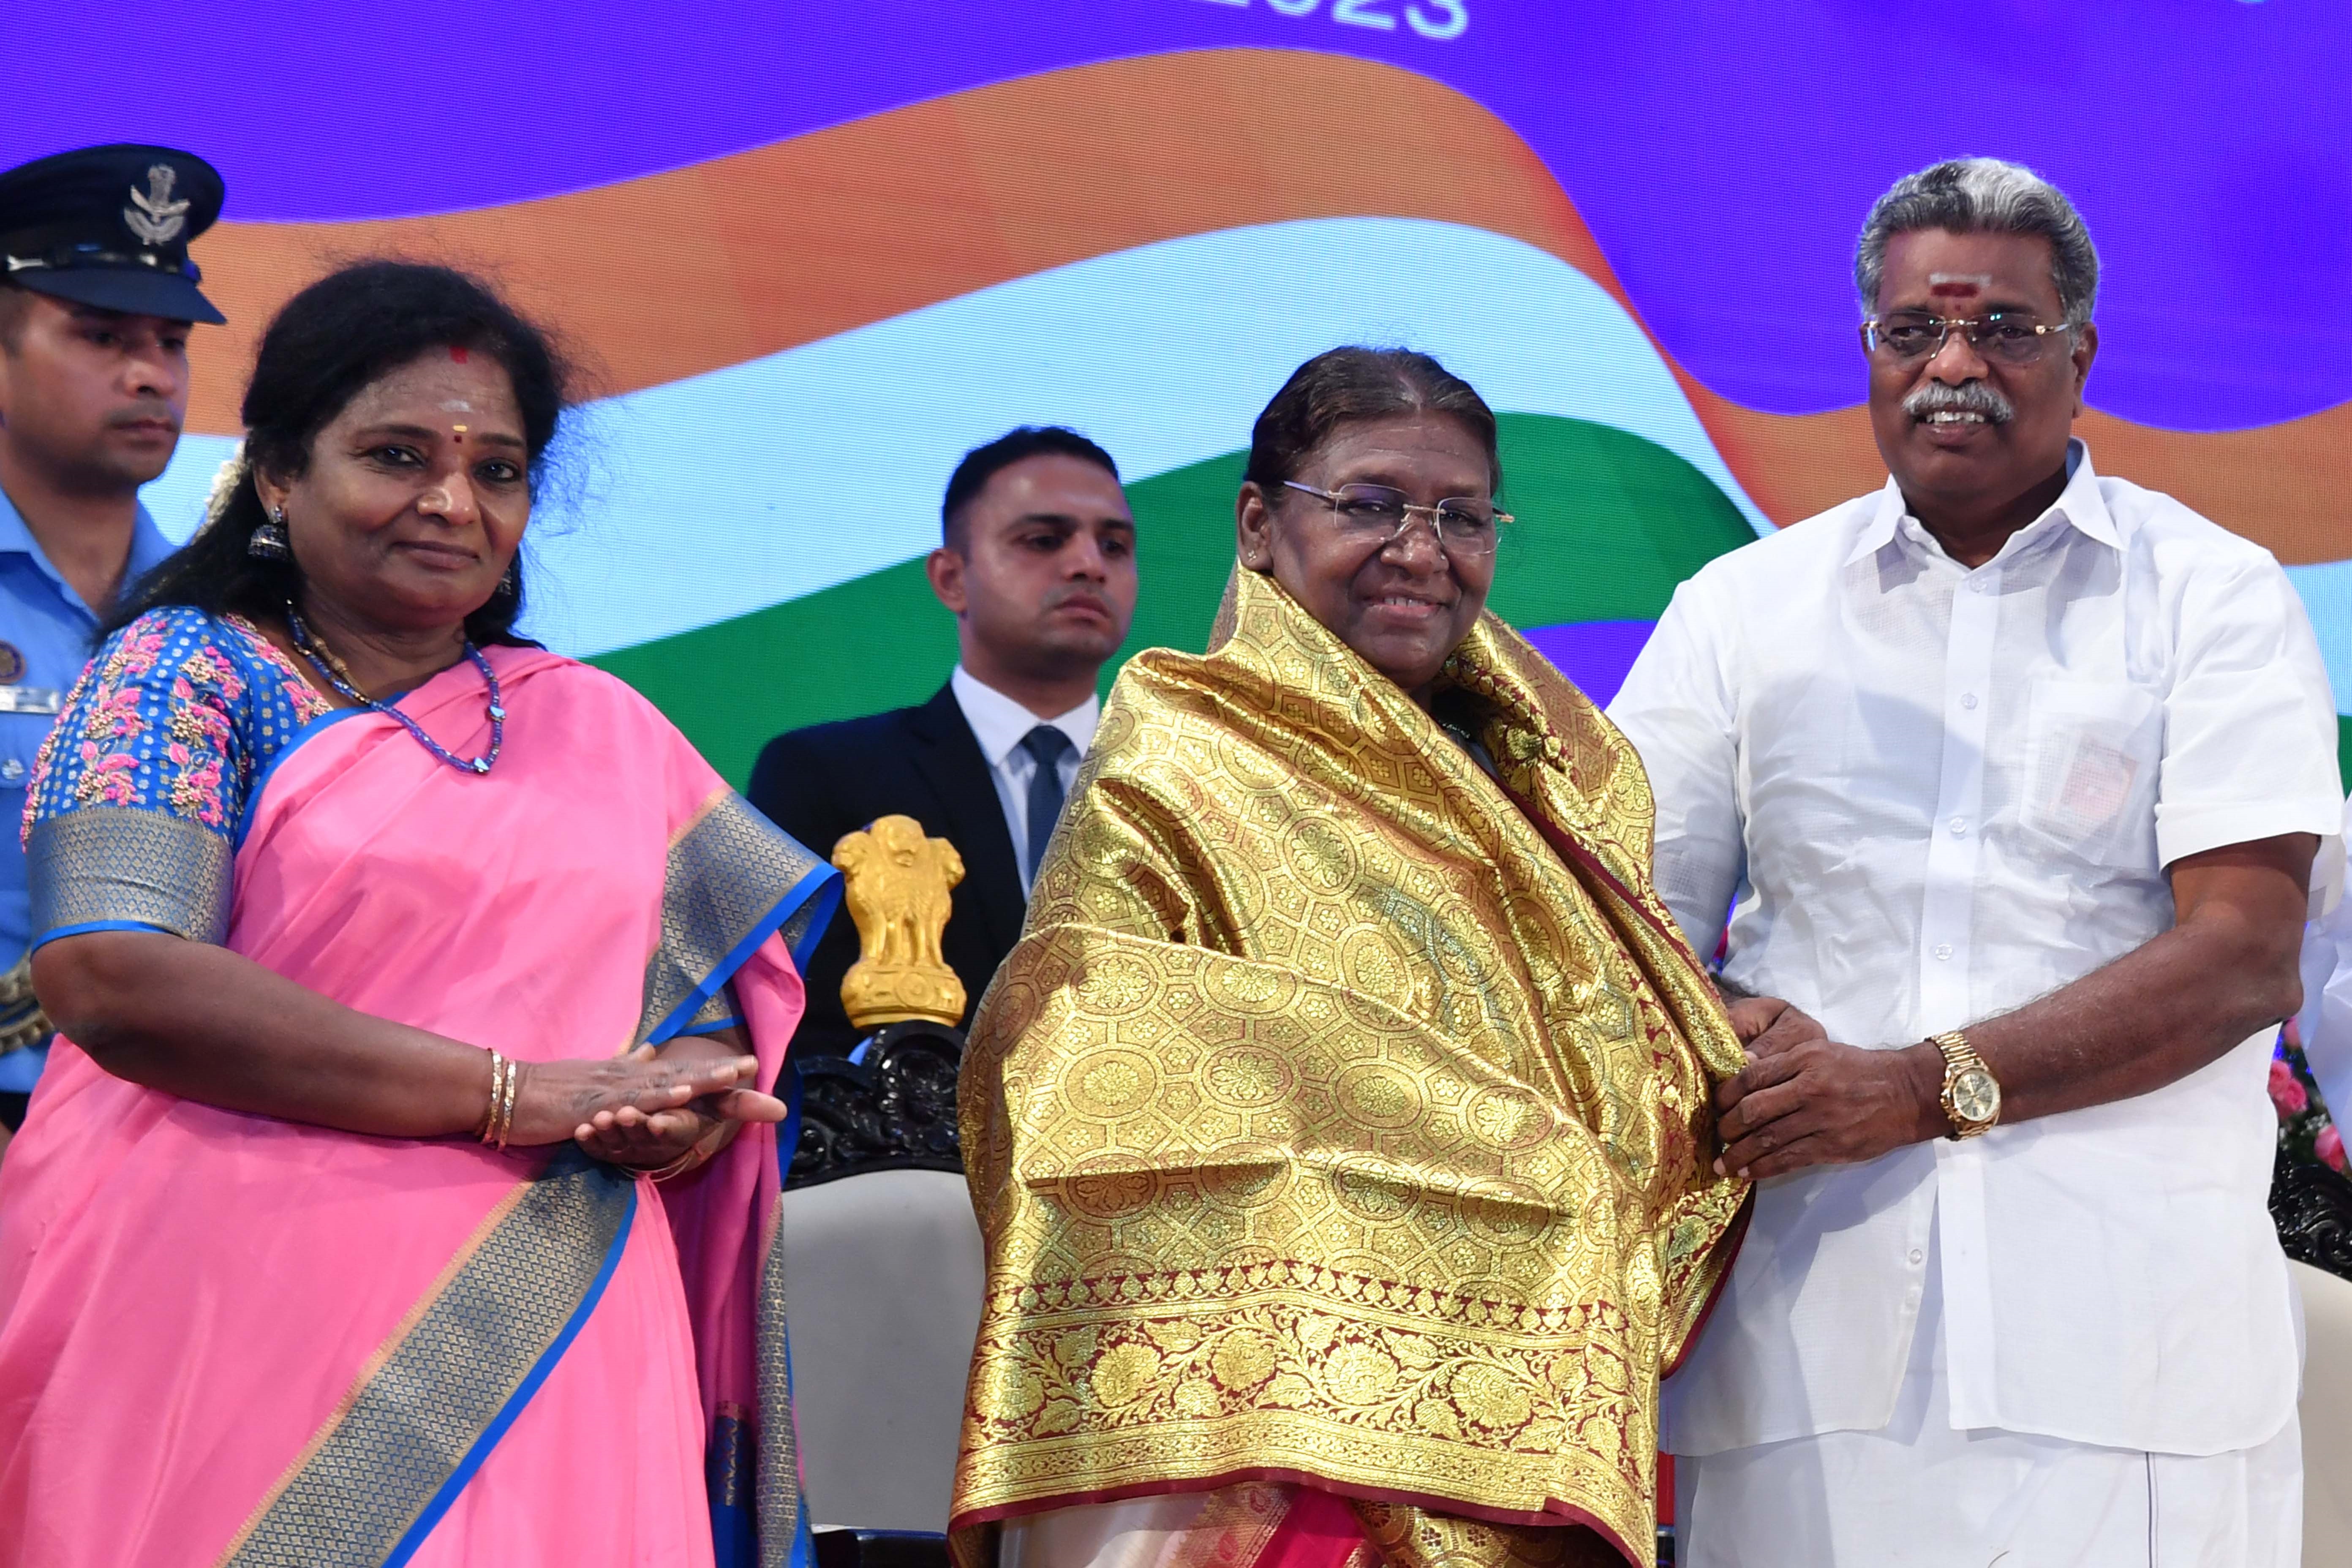 The President of India, Smt Droupadi Murmu attended the civic reception hosted in her honour by the Government of Puducherry on August 7, 2023.